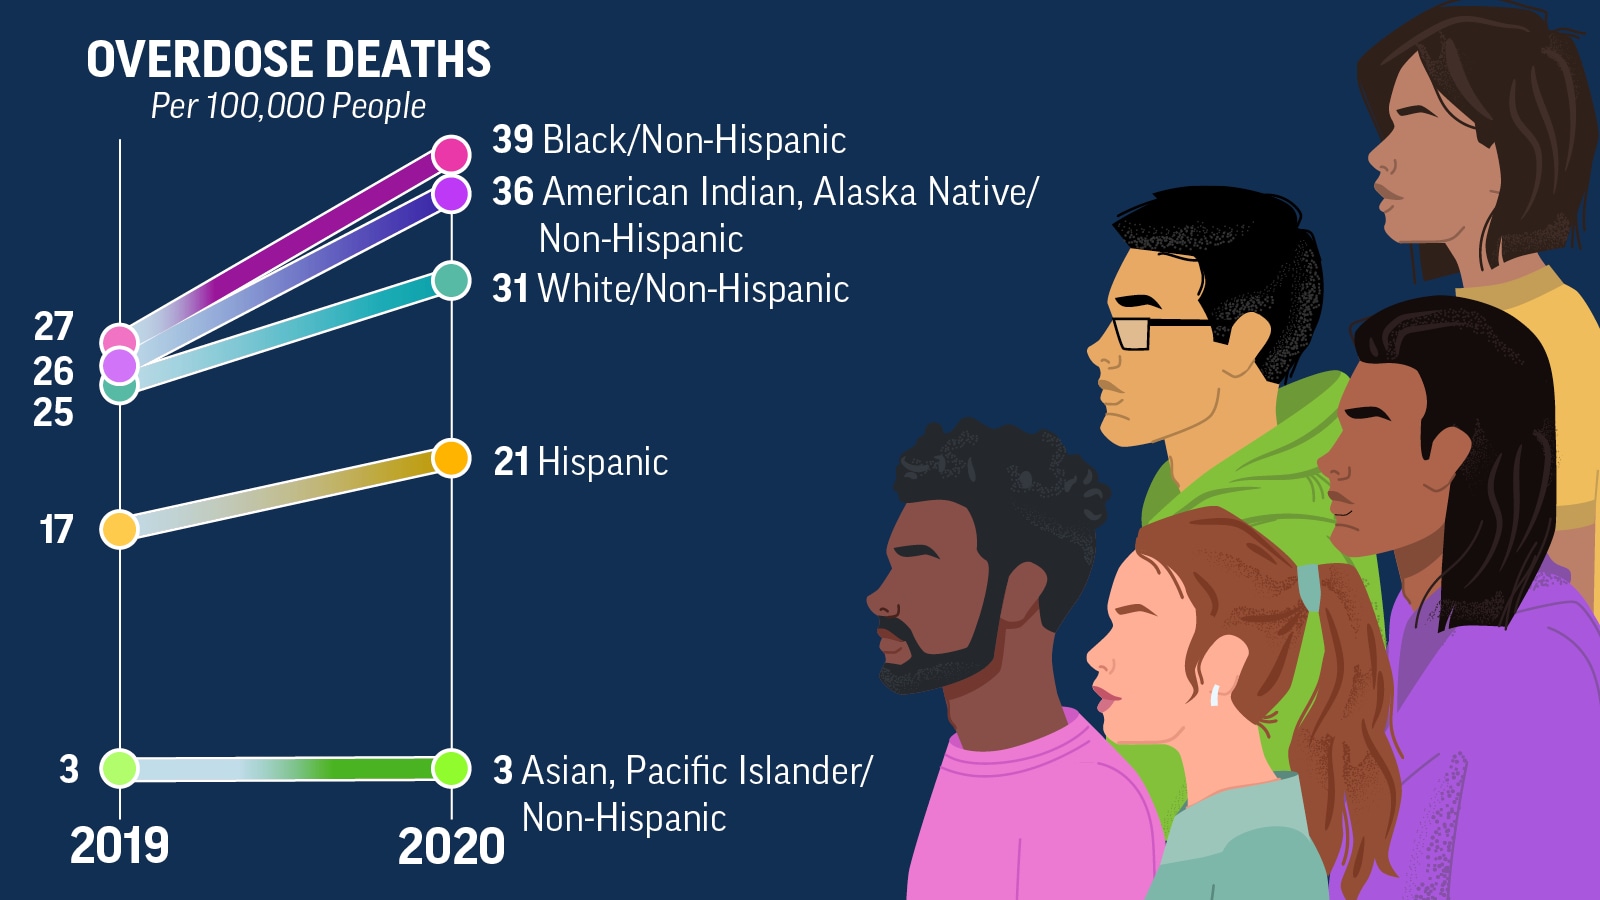 Infographic depicting overdose deaths increased more for certain groups than others from 2019 to 2020.